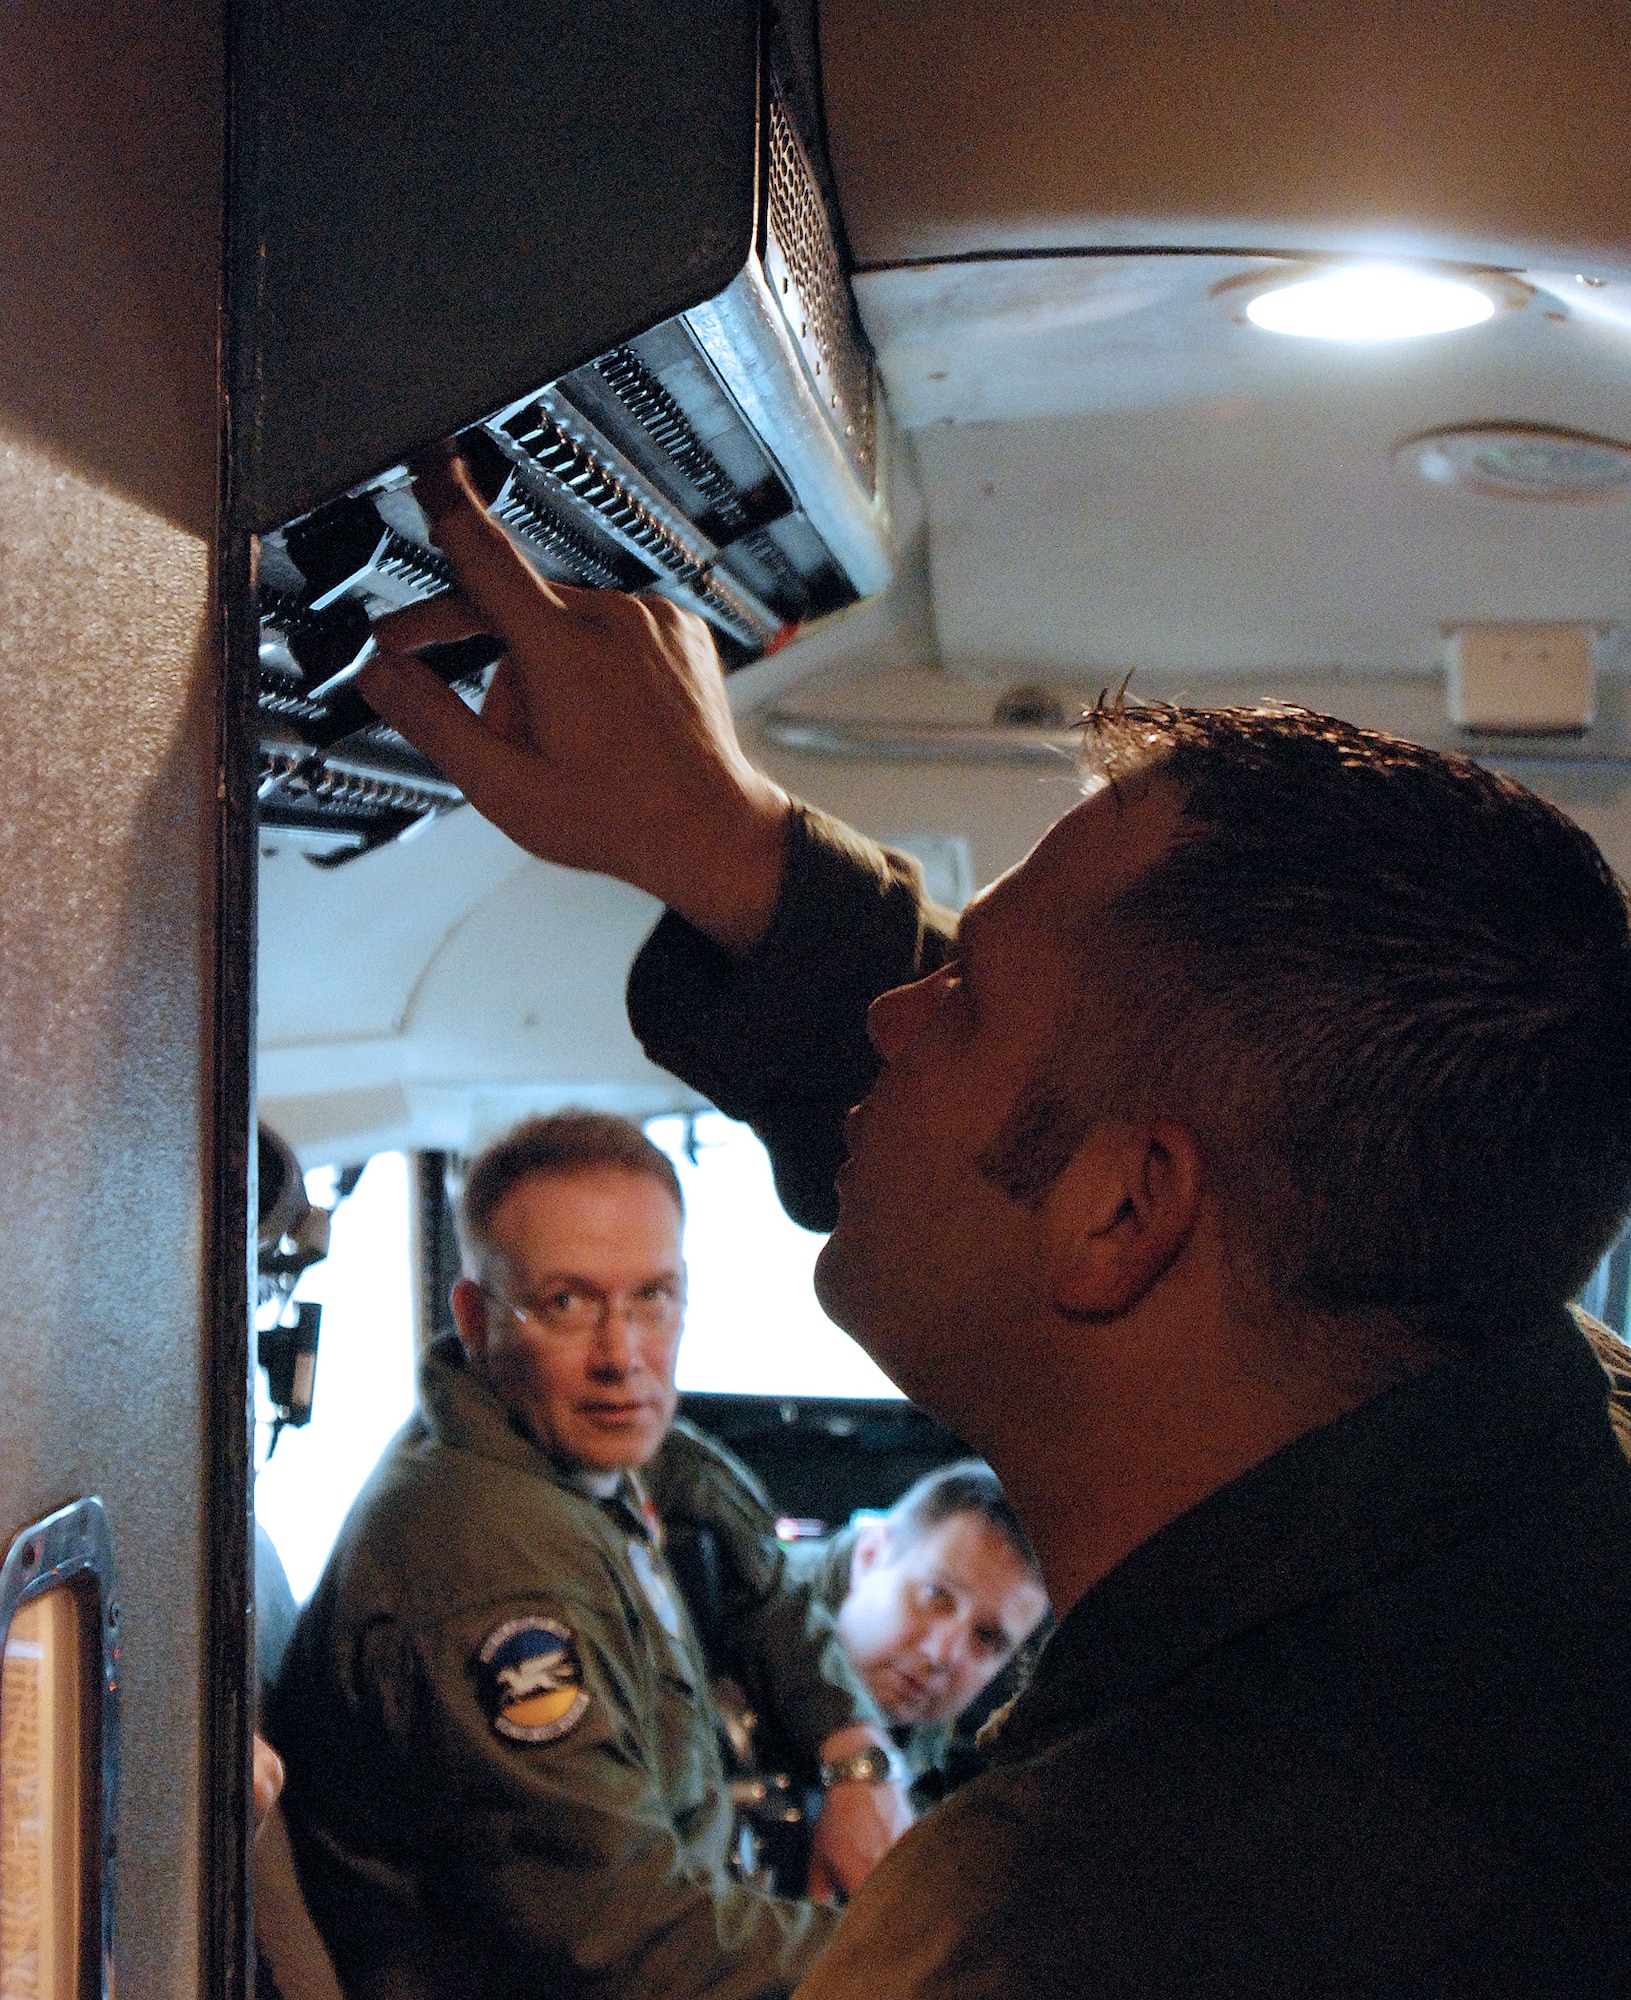 Instructors from the 356th Airlift Squadron, train C-5 crew members on the modernized avionics package installed in the C-5A Galaxy cargo aircraft as part of the Avionics Modernization Program. The Alamo Wing was the first C-5 unit to recieve the upgrade for the A model. The AMP replaces analog avionics instruments with digital electronic equipment. The AMP program is just one way the Air Force is recapilizing its airlift fleet. (U.S. Air Force photo/Airman Brian McGloin)